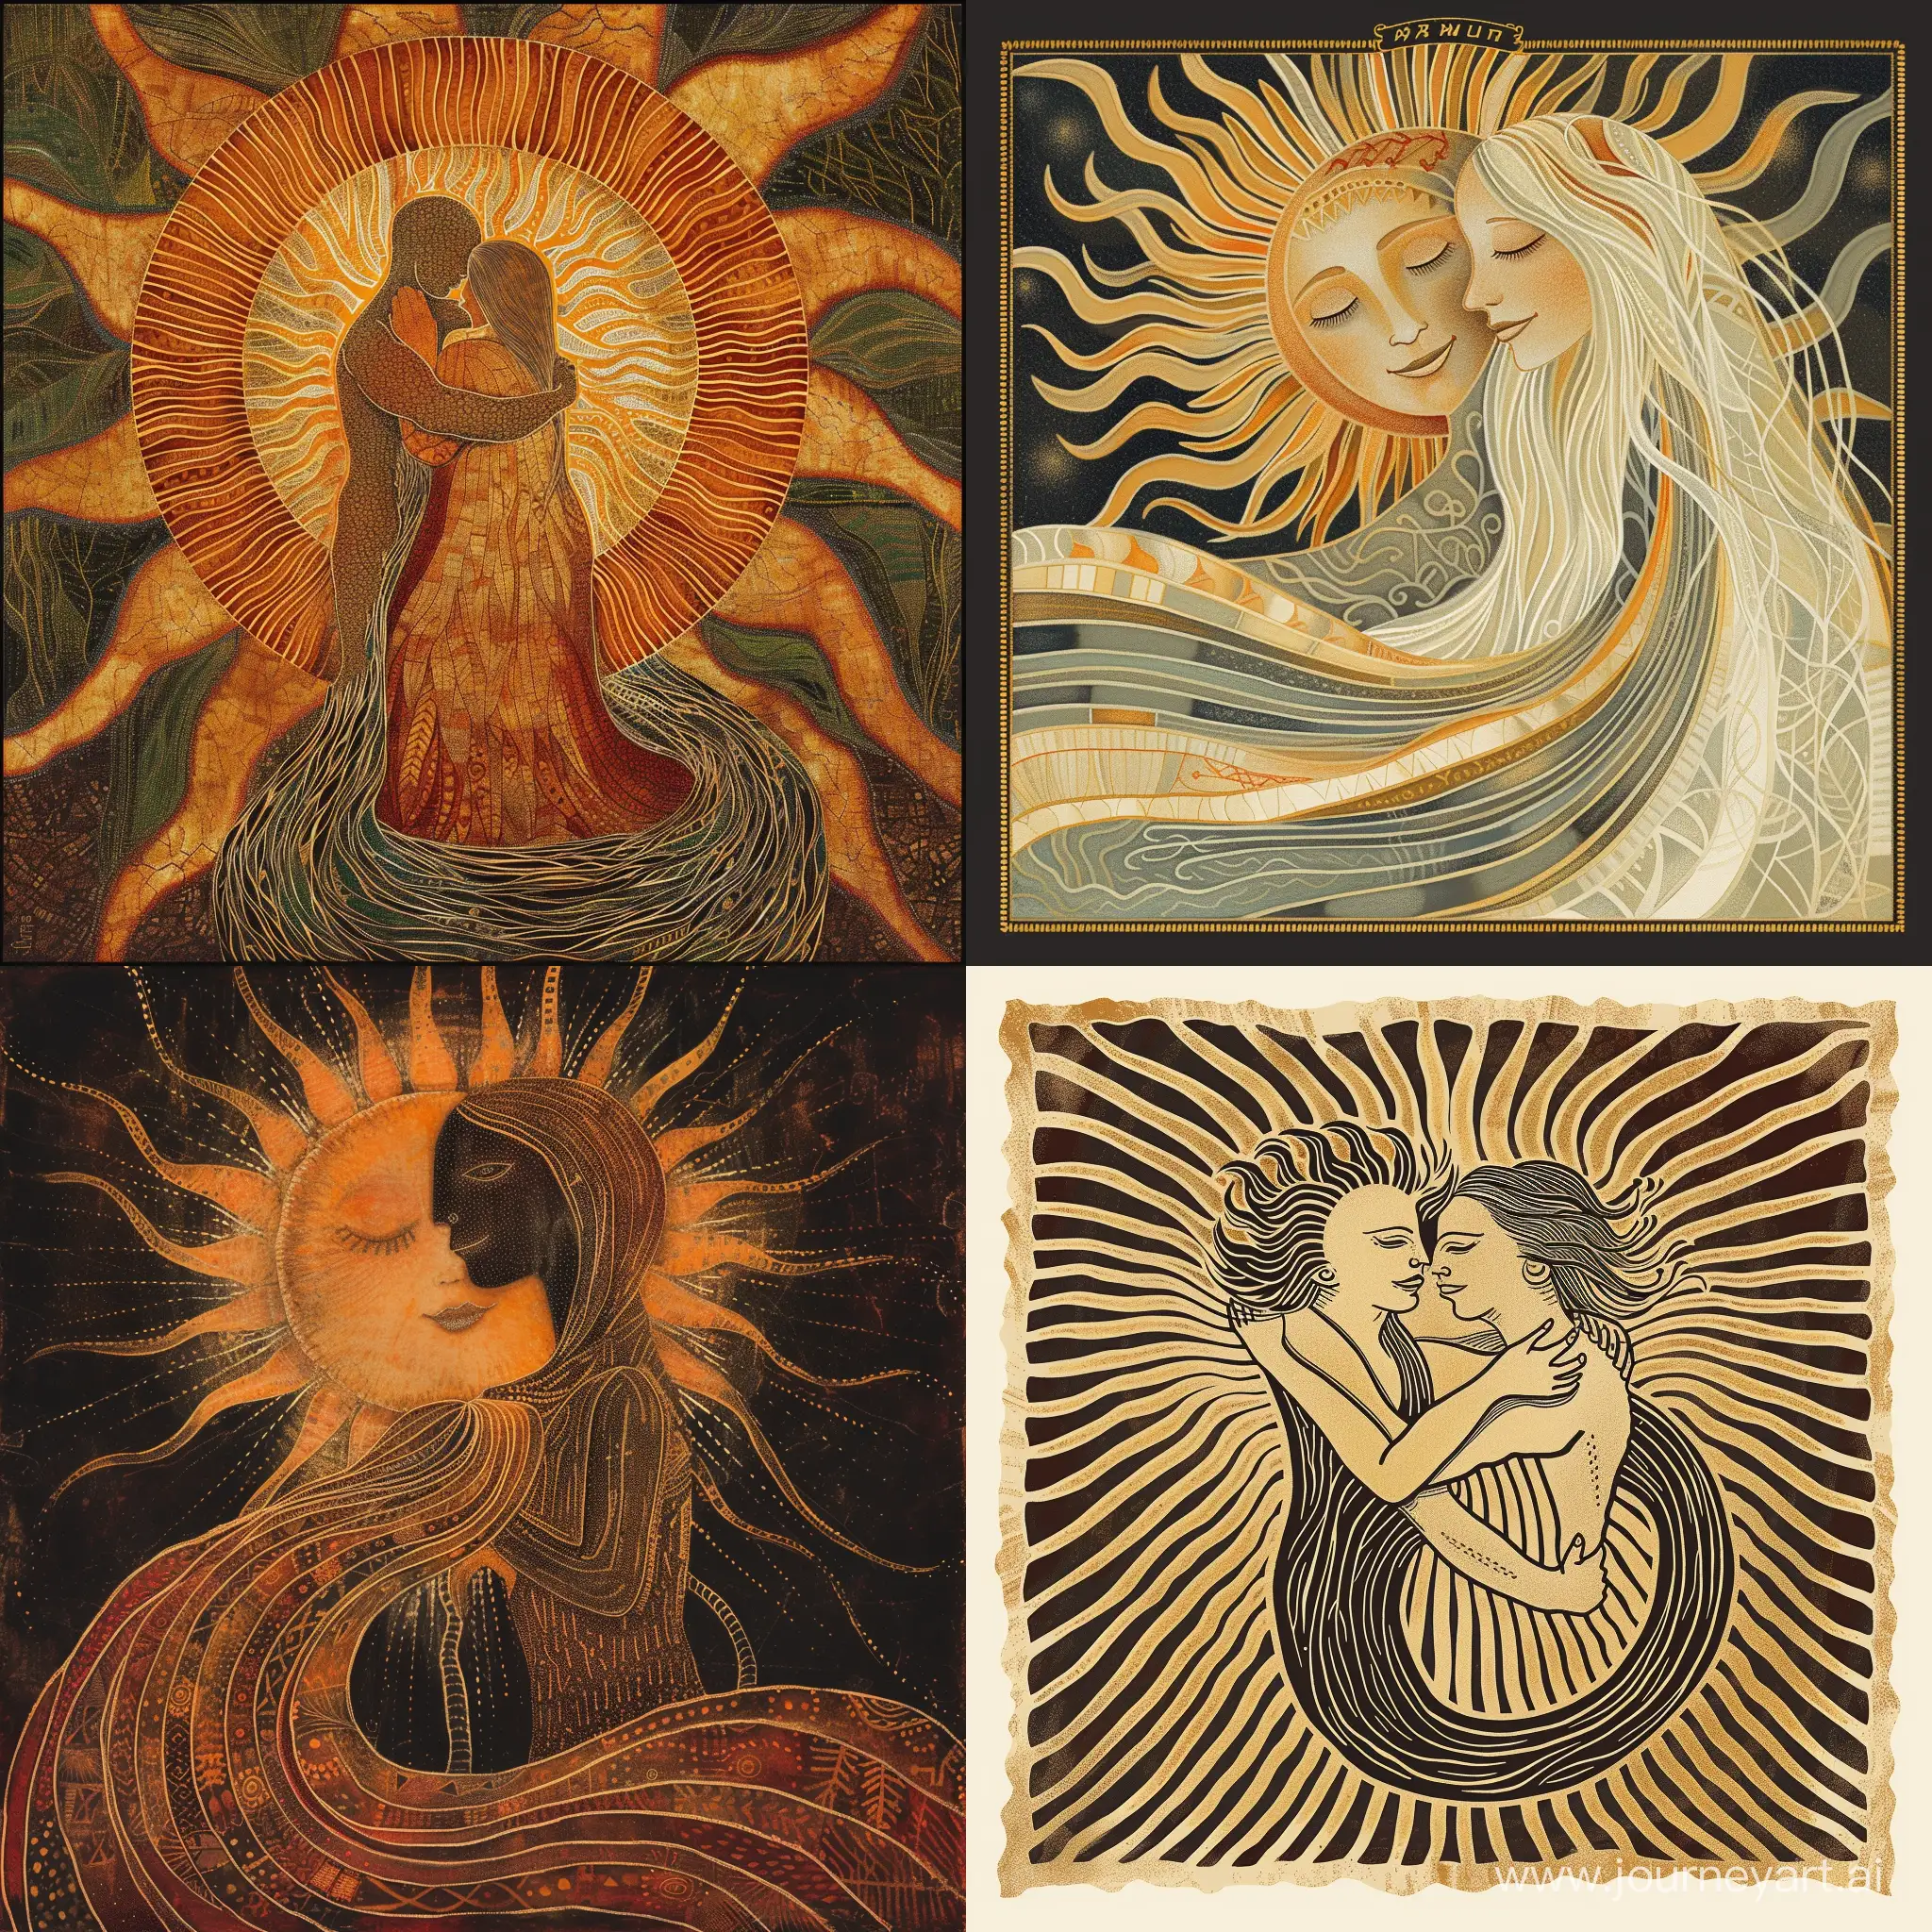 humanization of the sun in the form of a man and the river in the form of a woman, they embrace, majestic, sacred, smoothly moving, warm rays of the sun, the river flows smoothly, ethnic style, the style of Scandinavian myths